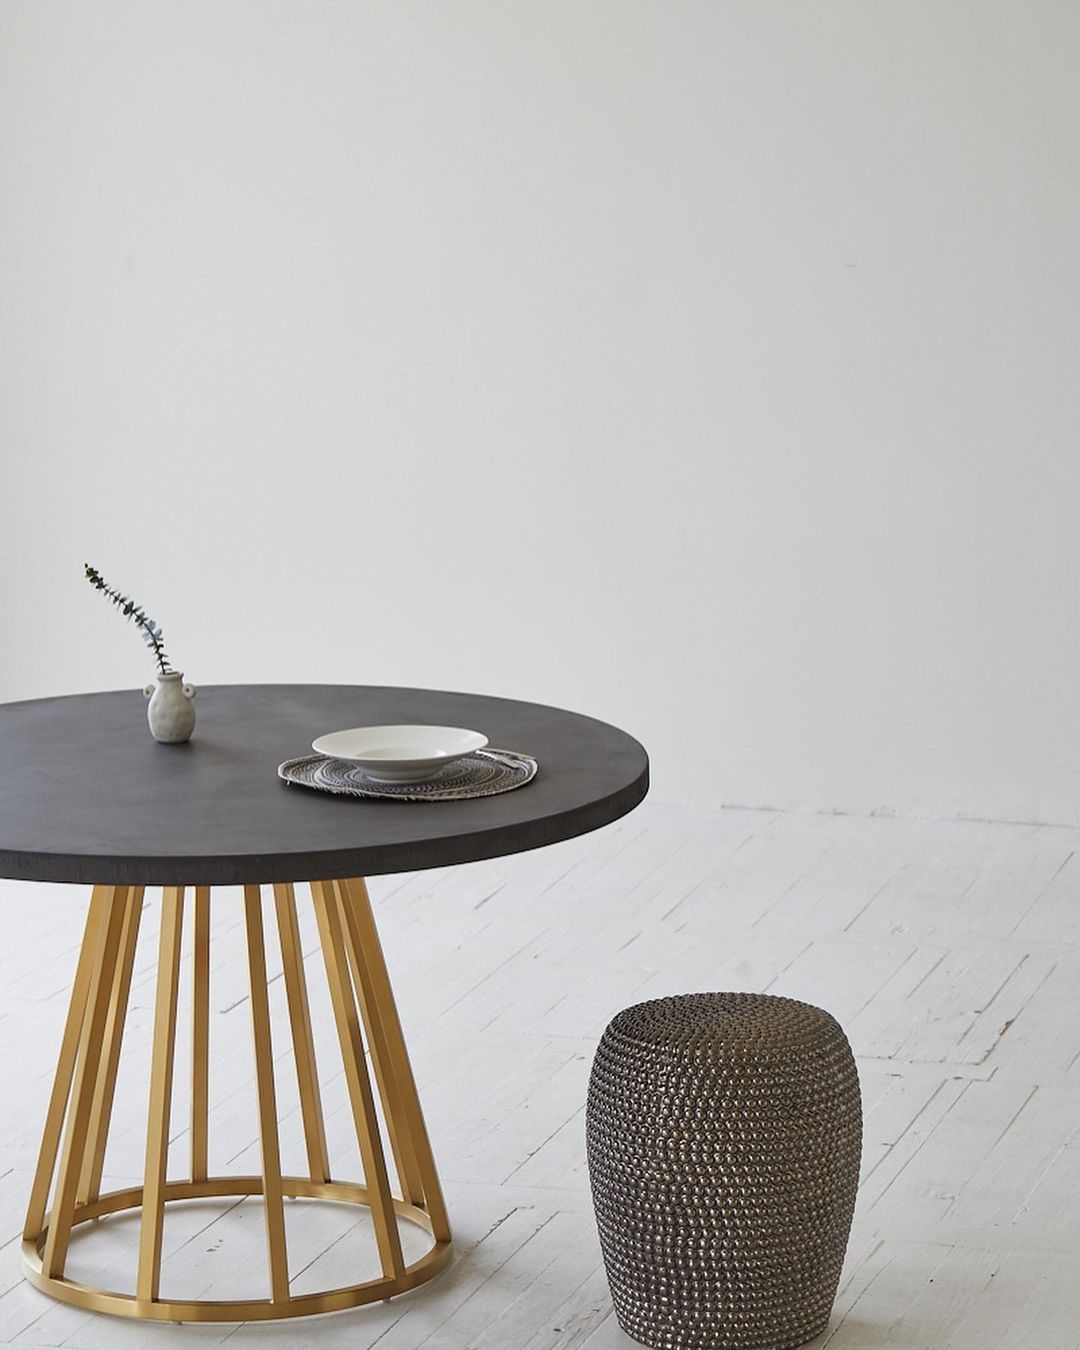 Round Bredon Dining Table